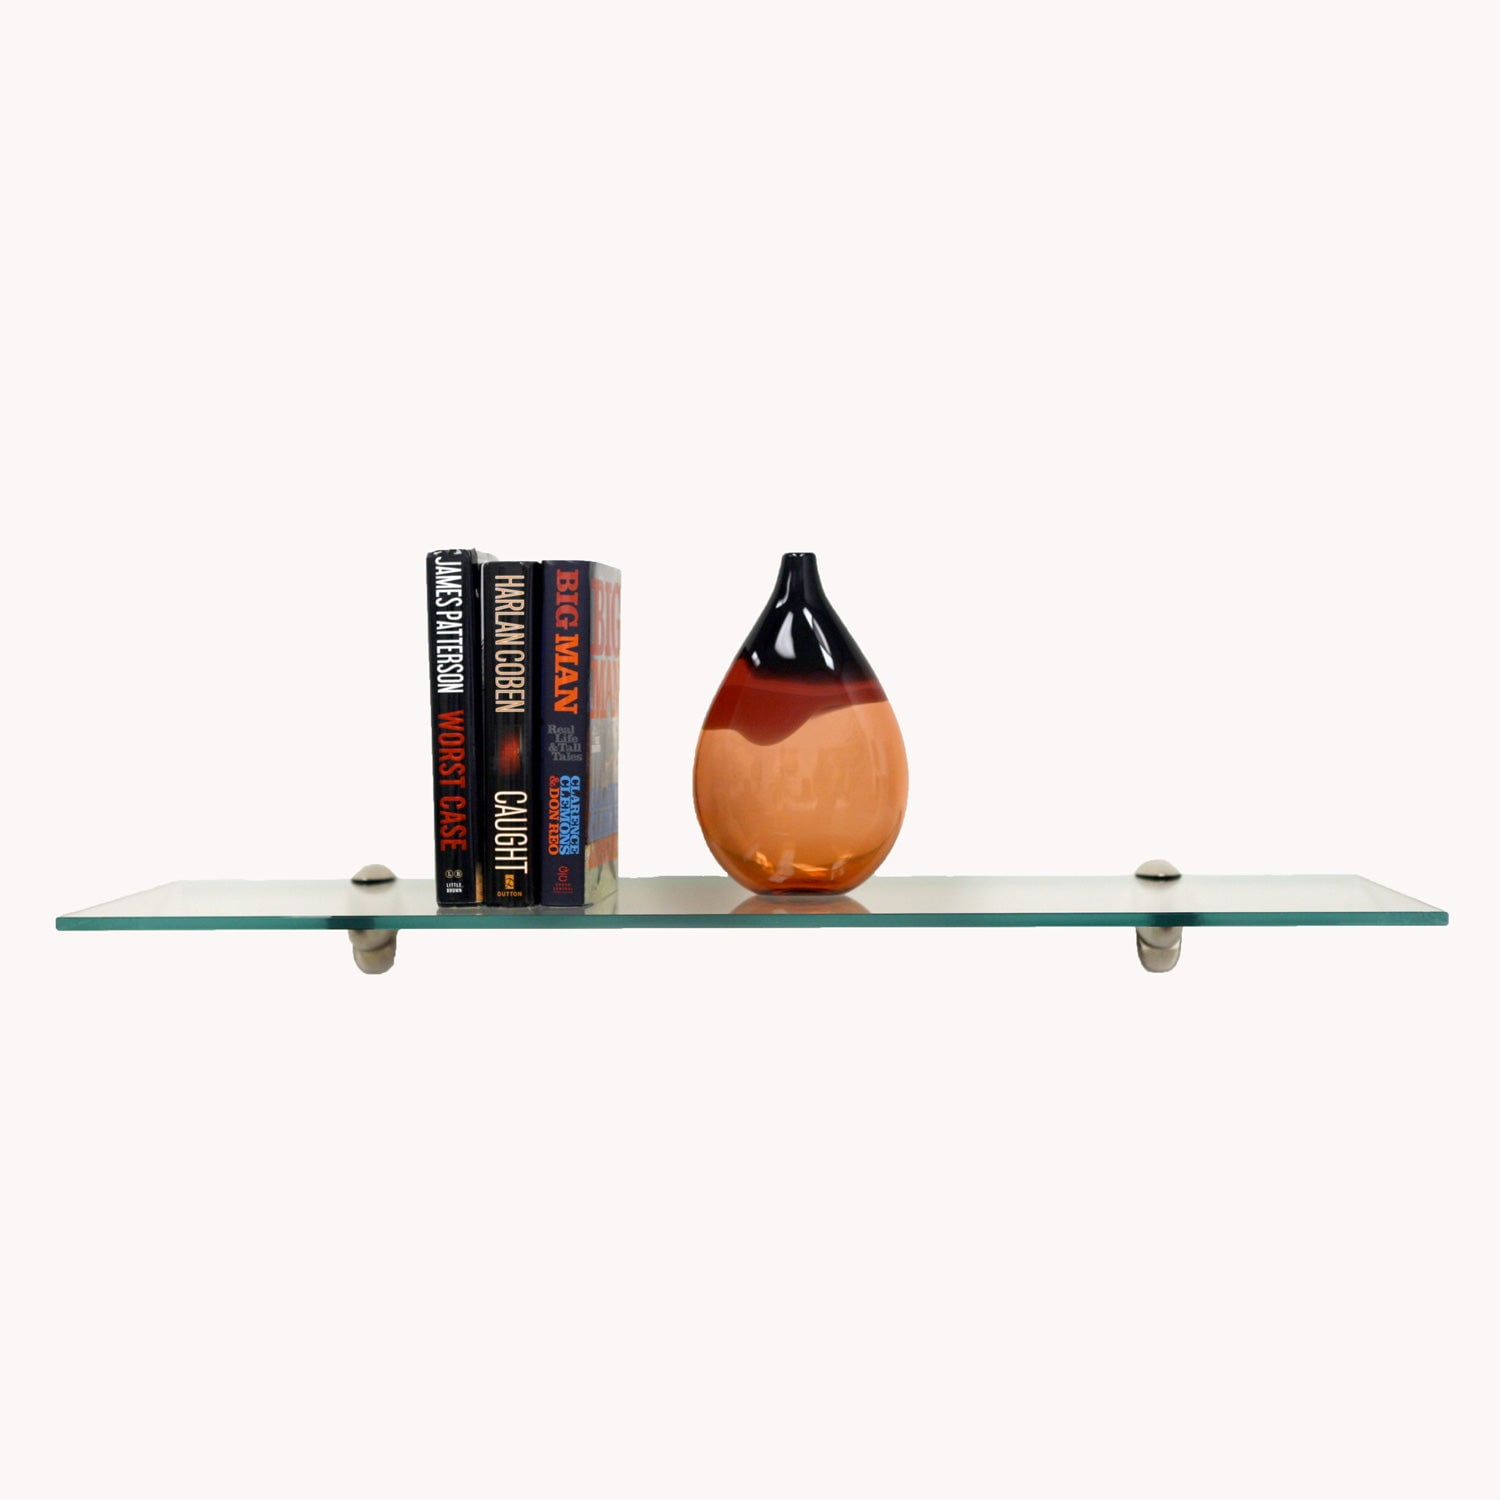 10" X 24" Heron Floating Glass Shelves Brackets Included with Each Shelf  By Spancraft Glass